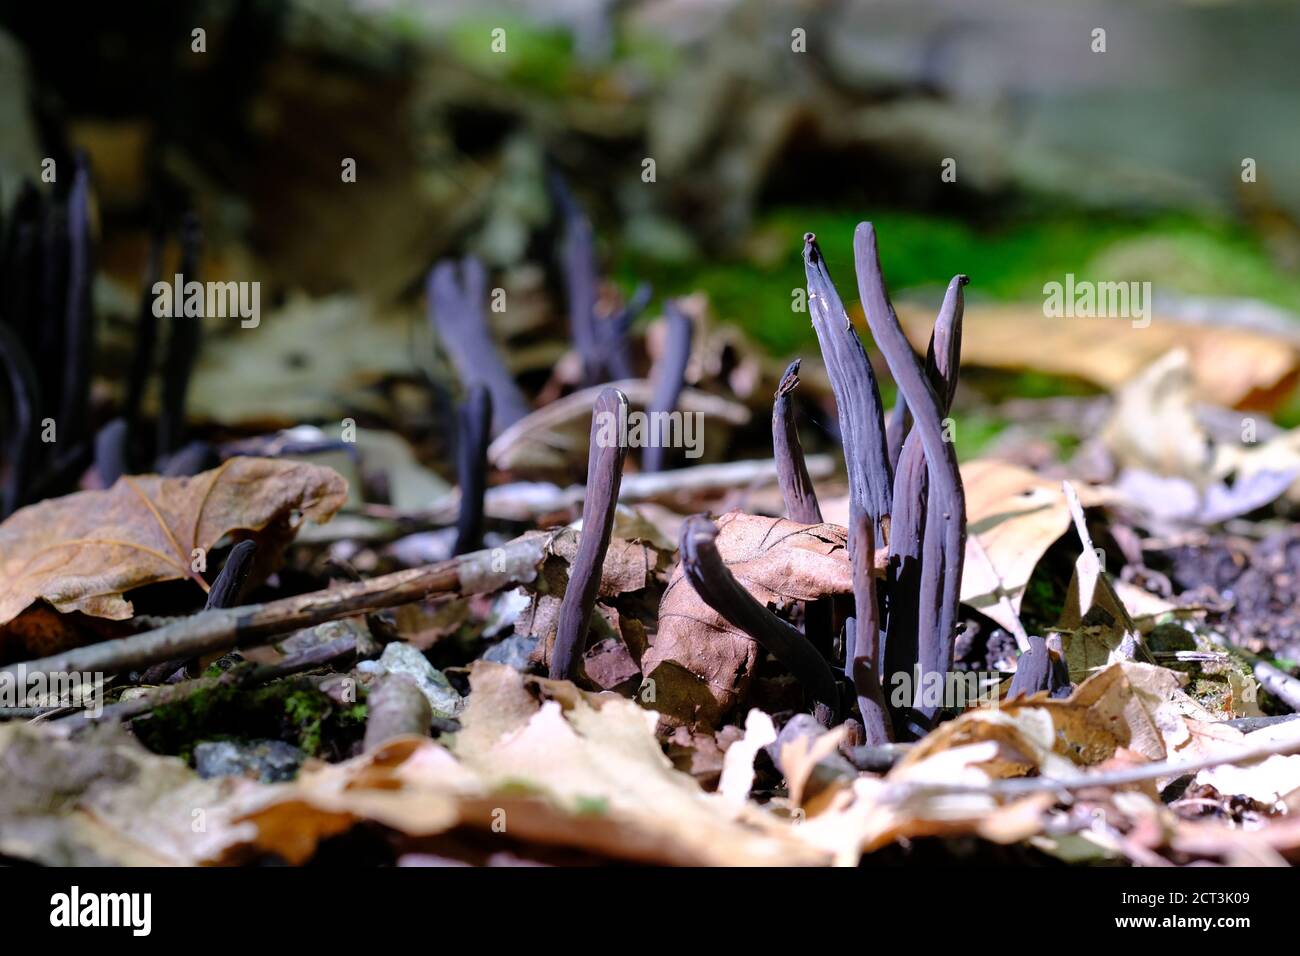 Black finger like fungus (Geoglossum difforme?) poking through the forest undergrowth in Val-des-Monts, Quebec, Canada. Stock Photo